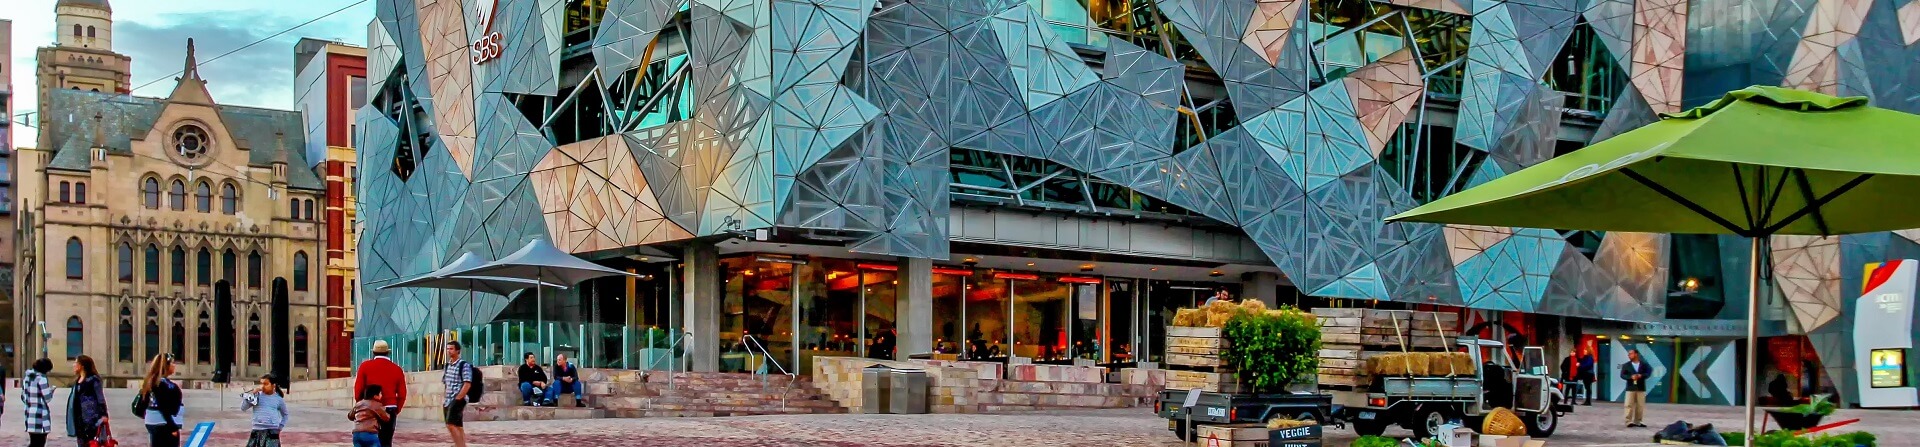 What is Federation Square known for?